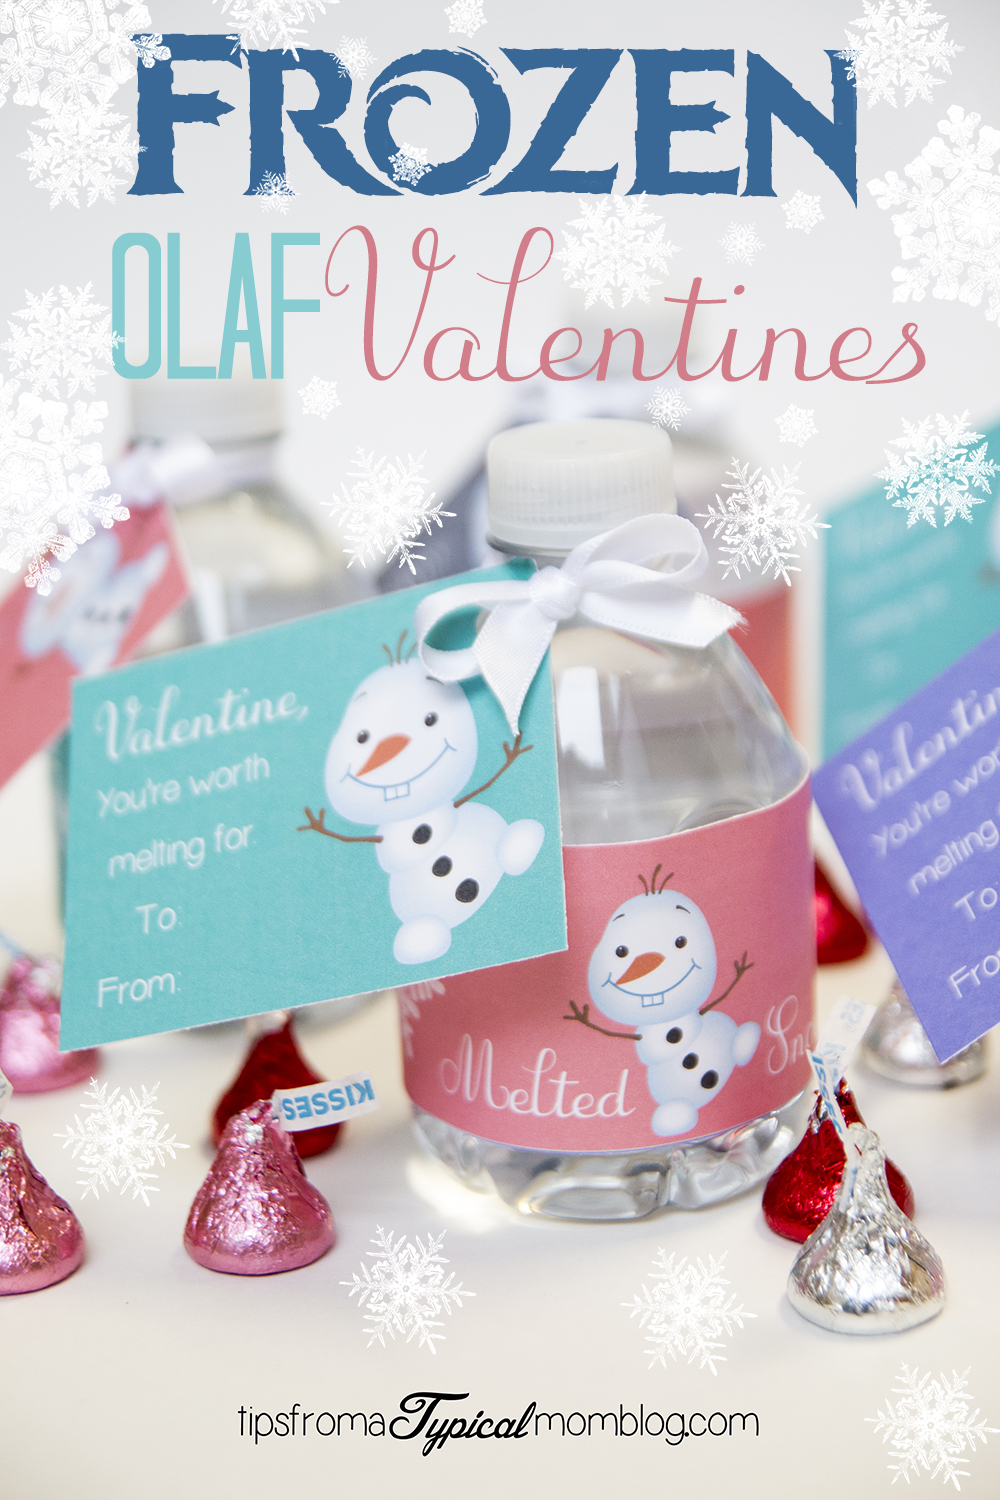 Frozen “You’re Worth Melting For” Valentines Free Printable